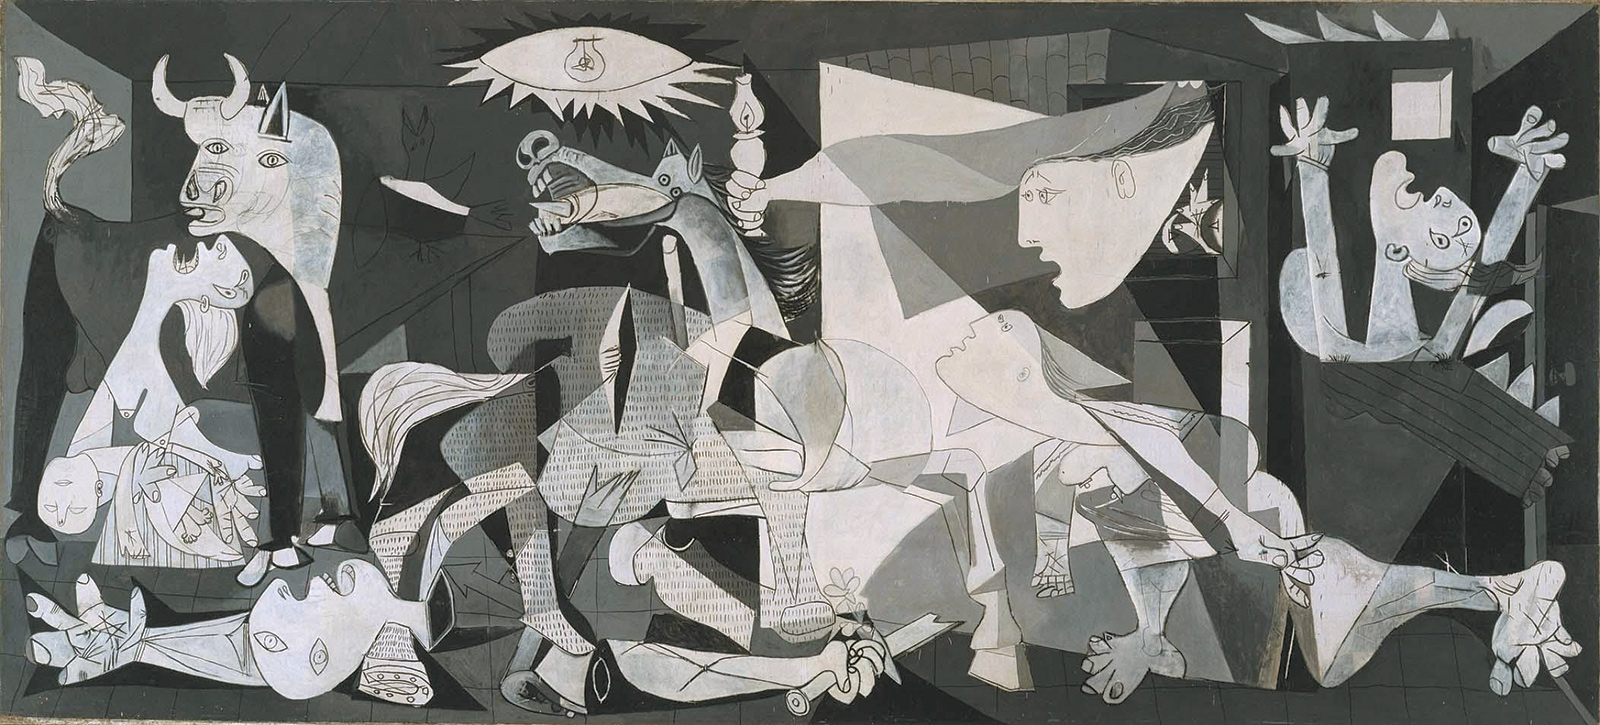 Pablo Picasso: Guernica, oil on canvas, May 1–June 4, 1937